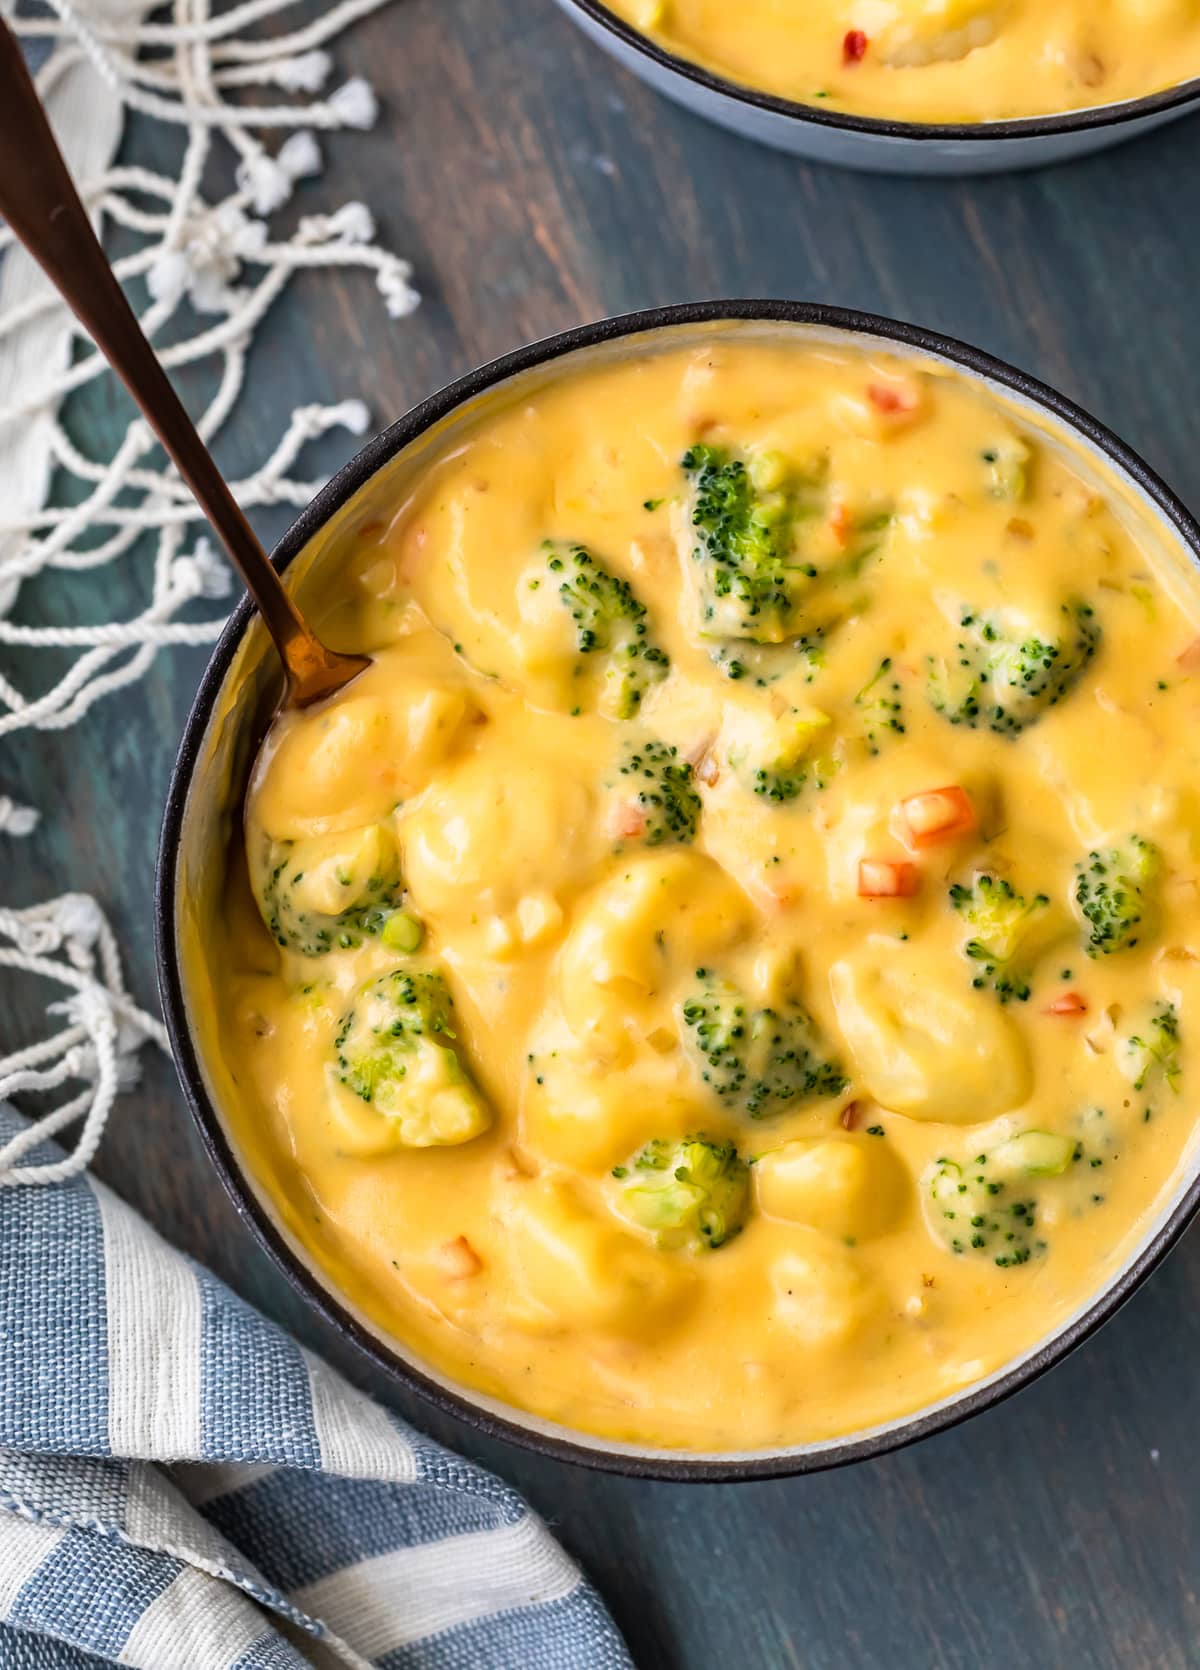 broccoli and cheese soup recipe with gnocchi